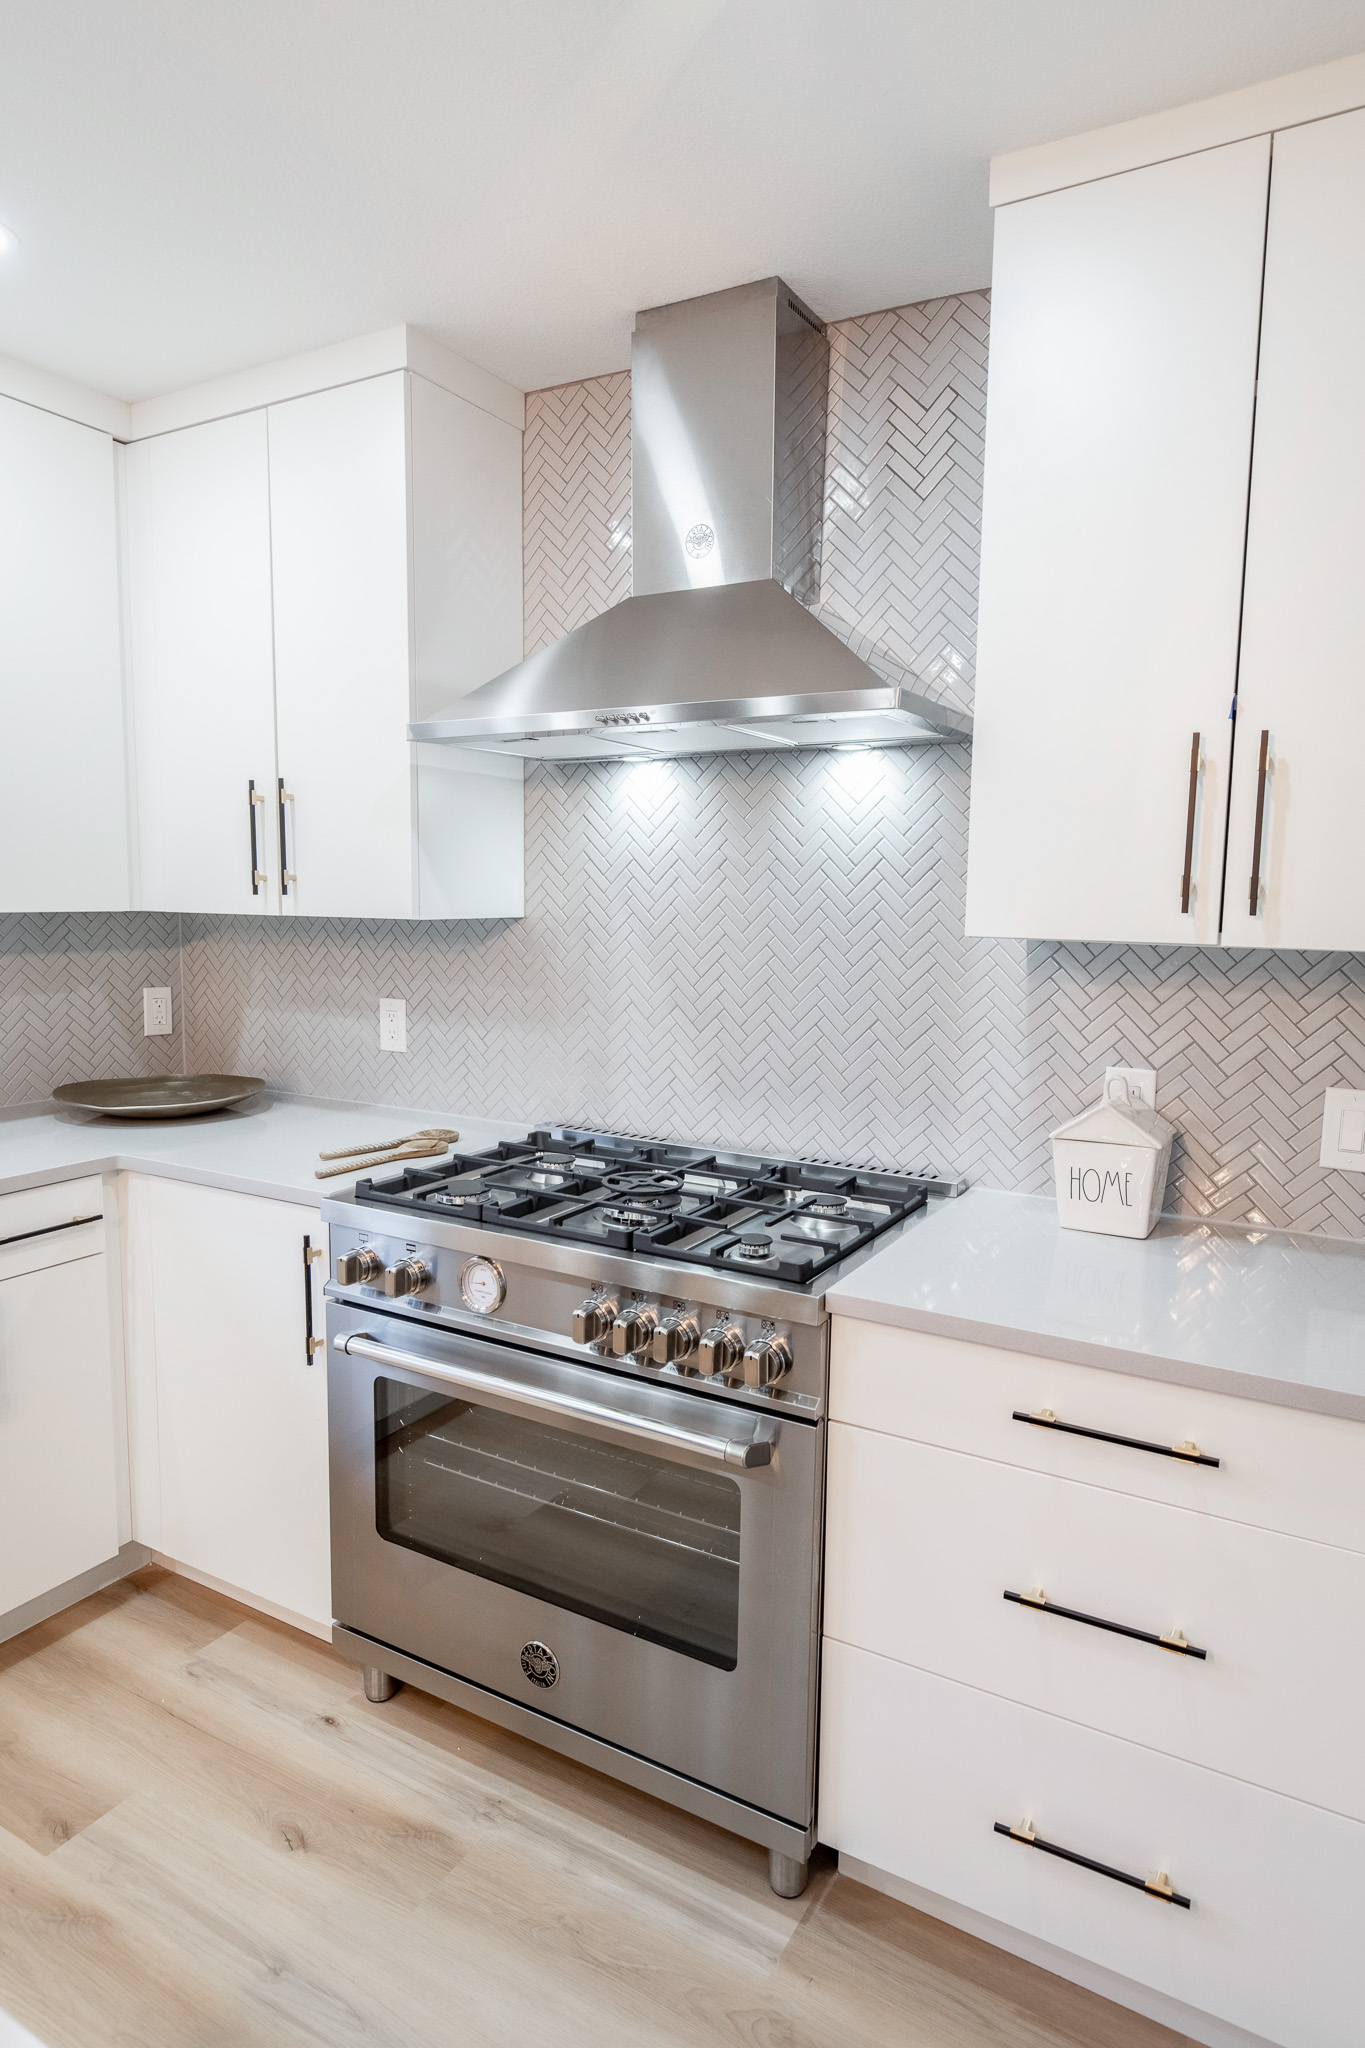 A new stainless steel oven, stove, and hood are set into white custom cabinetry. Against the wall, gray tile is positioned in a chevron pattern.